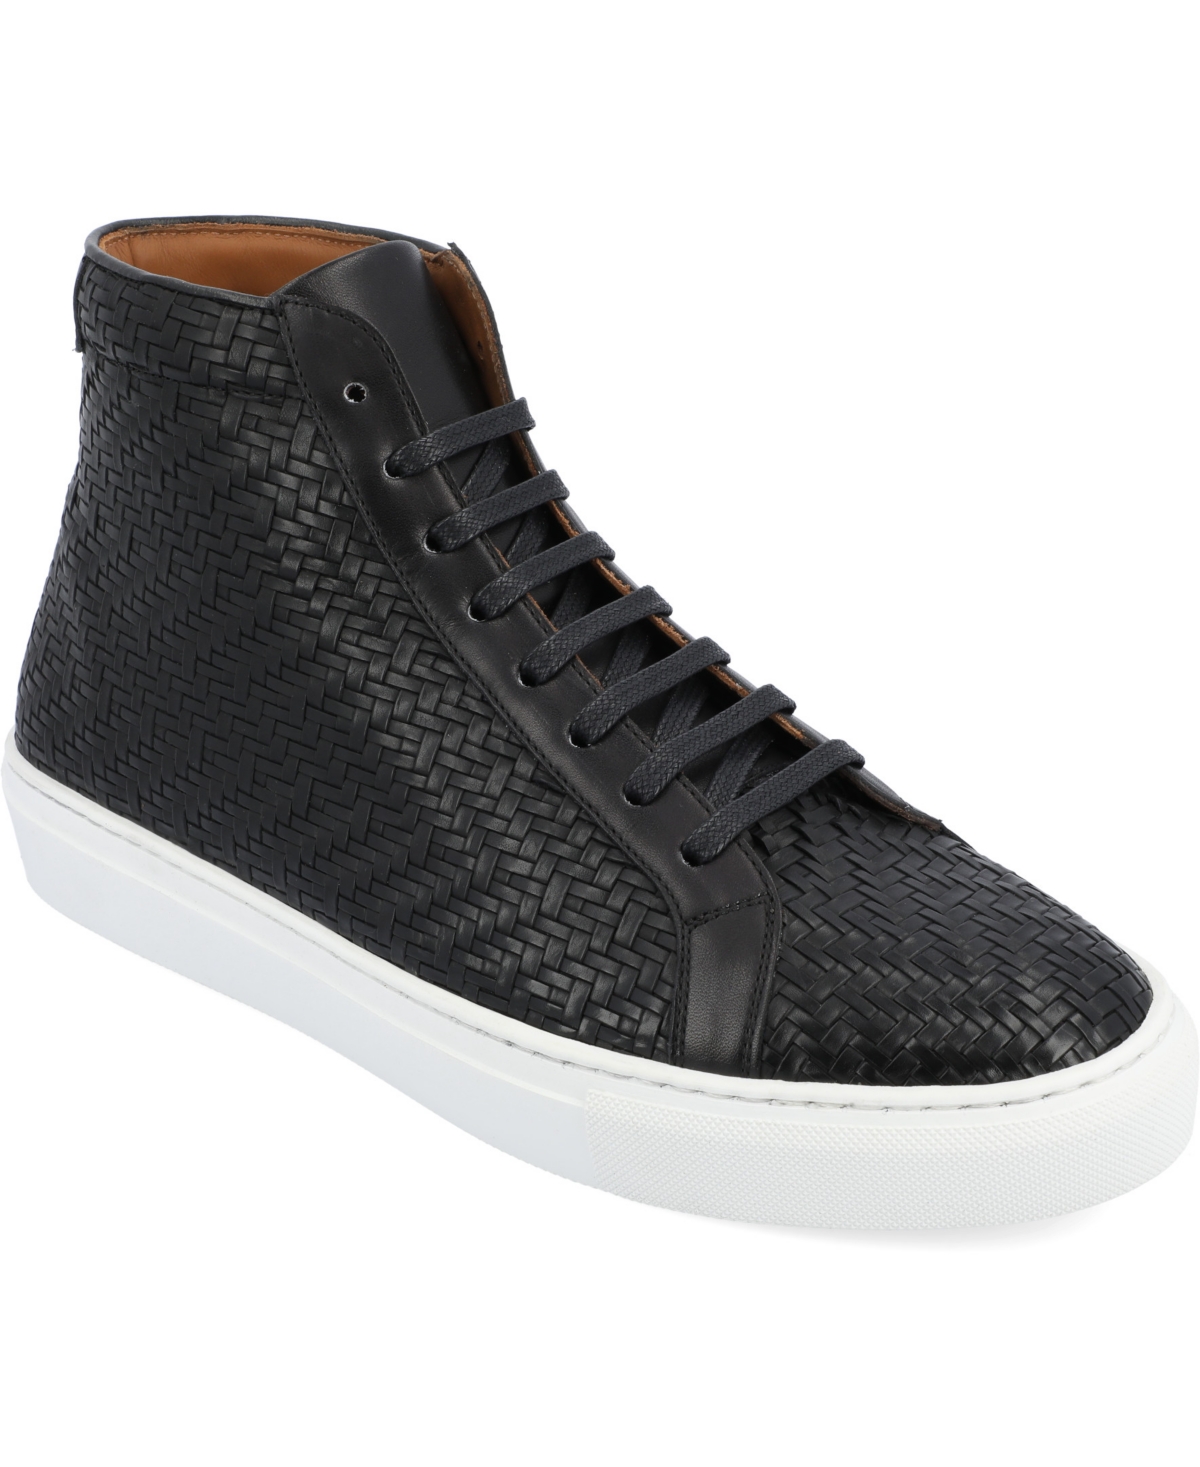 Men's Woven Handcrafted Leather High-top Lace-up Sneaker - Black Wove